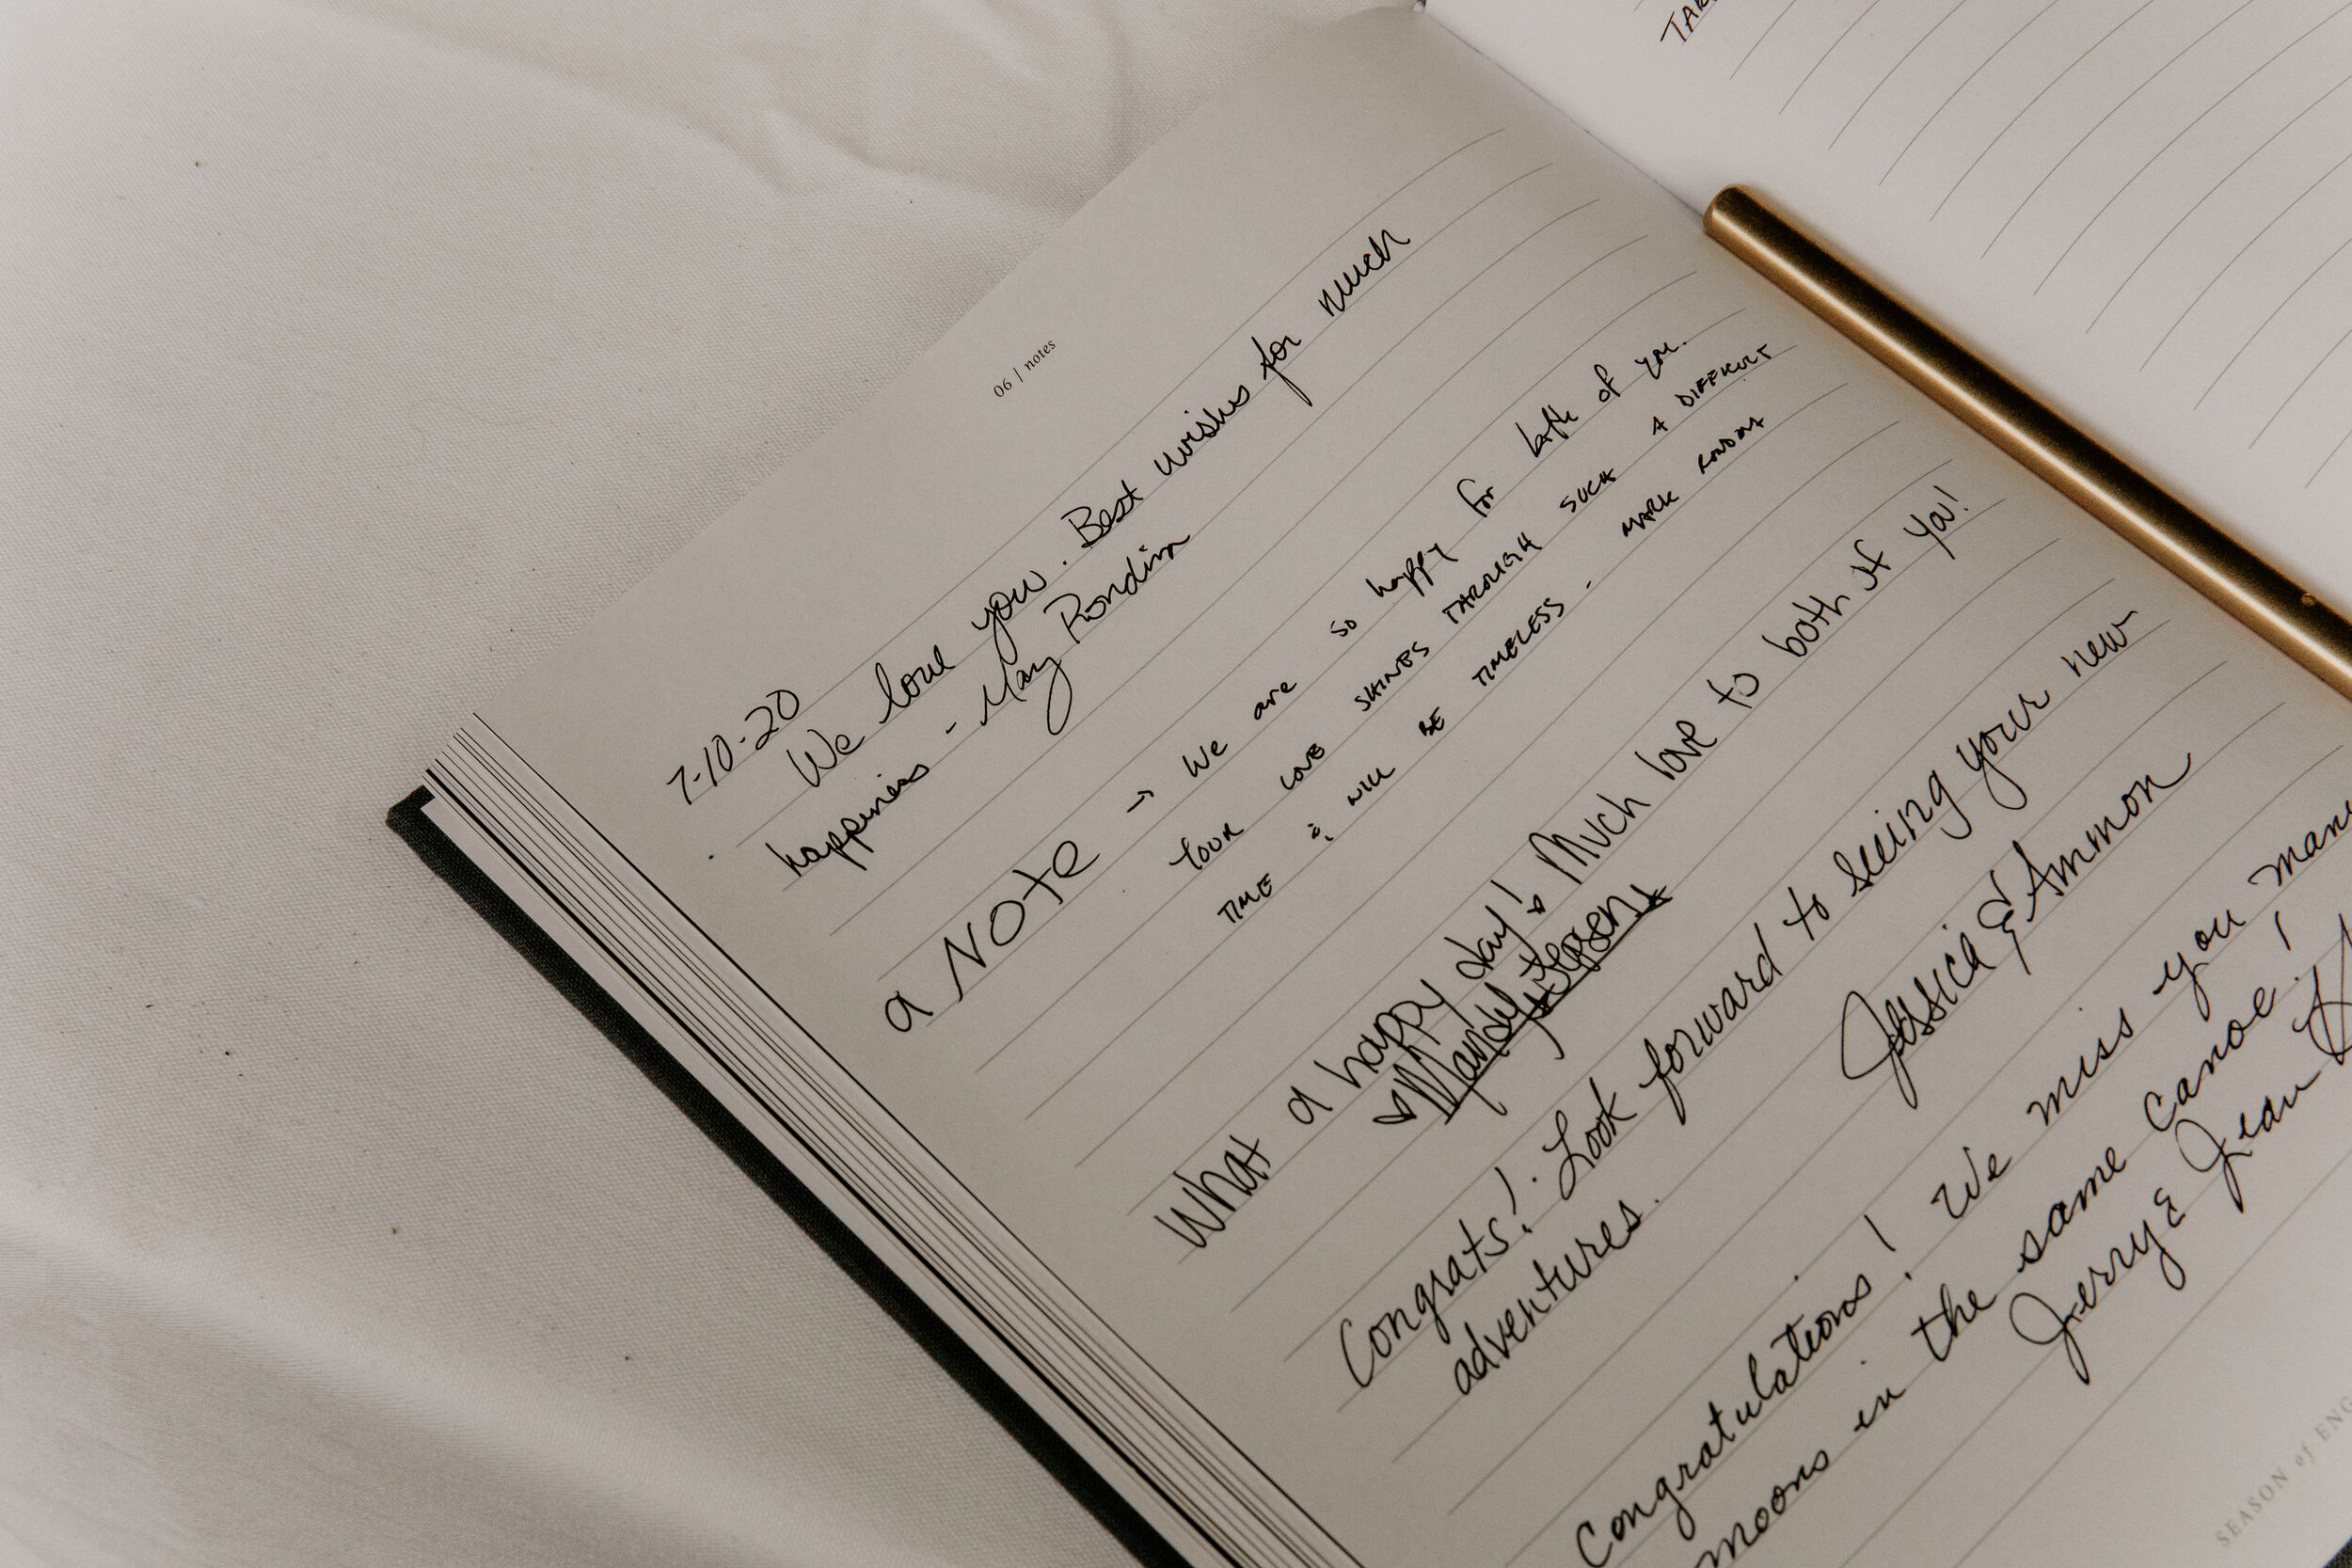  We had our guests leave us notes inside our    Season’s Engagement Journal   . We used this journal throughout our engagement to document our experiences and felt it was only right to include our guests notes in their, as well. 